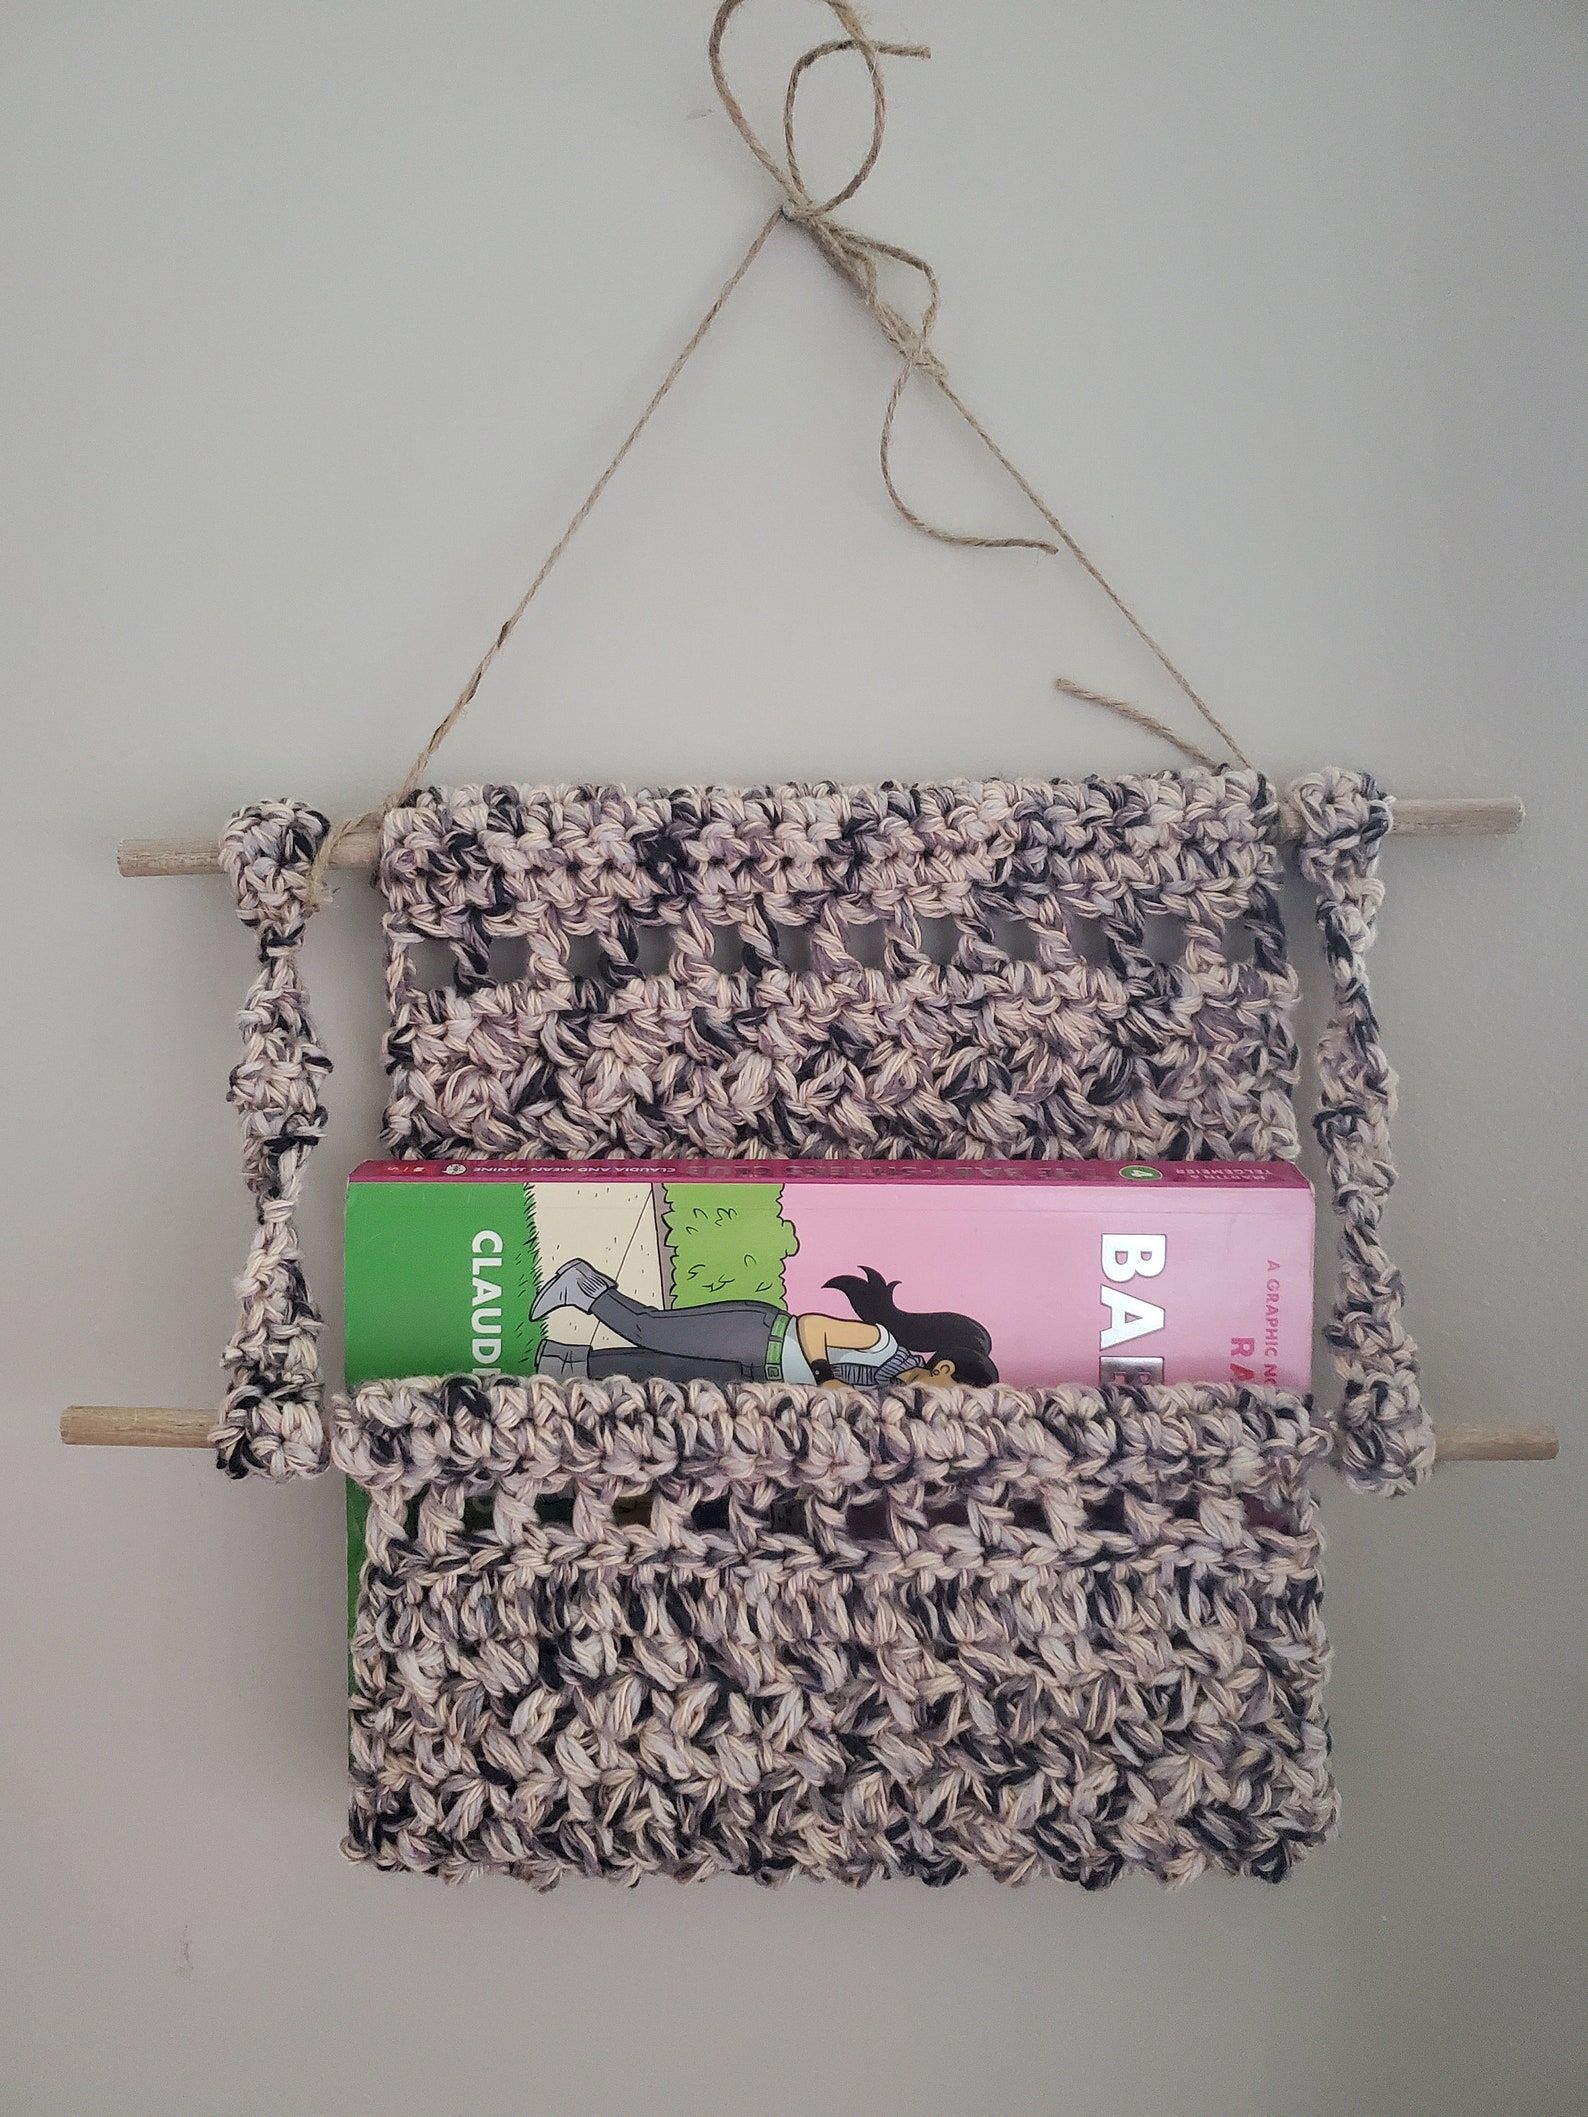 Purple pink and black yarn are crocheted into a wall hanging with a slot for holding a book. 